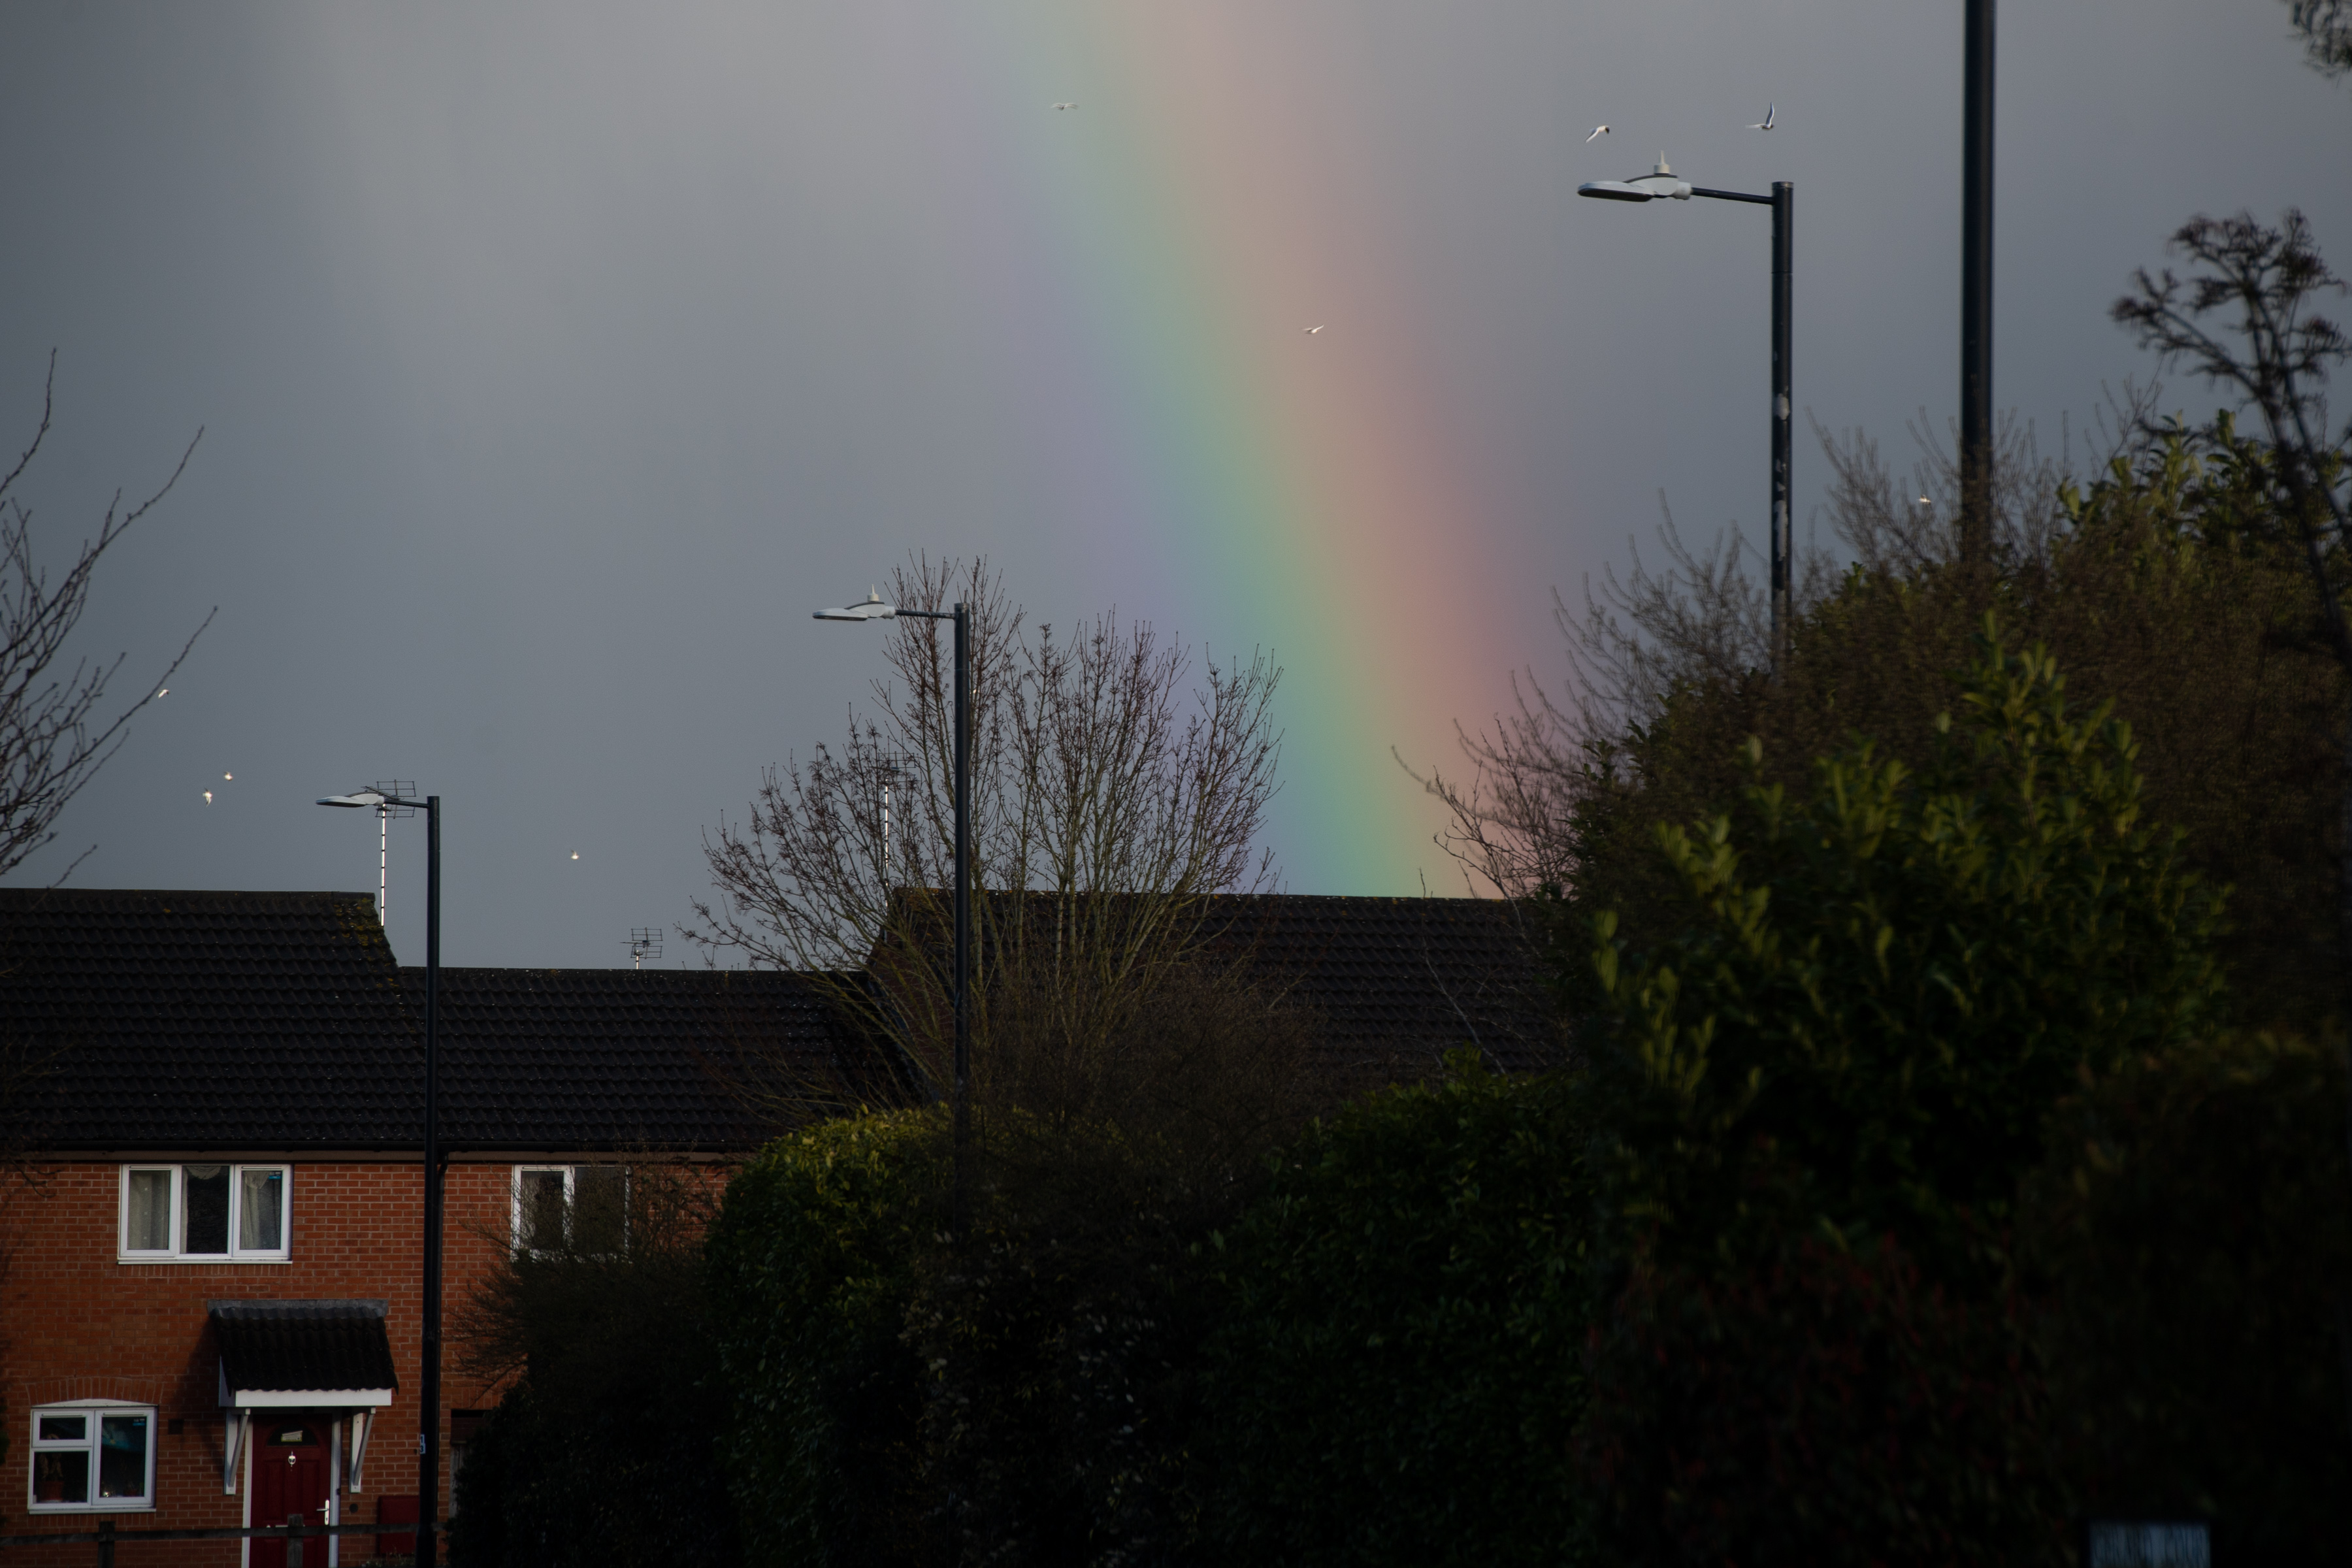 Rainbow emerging over roofs of houses